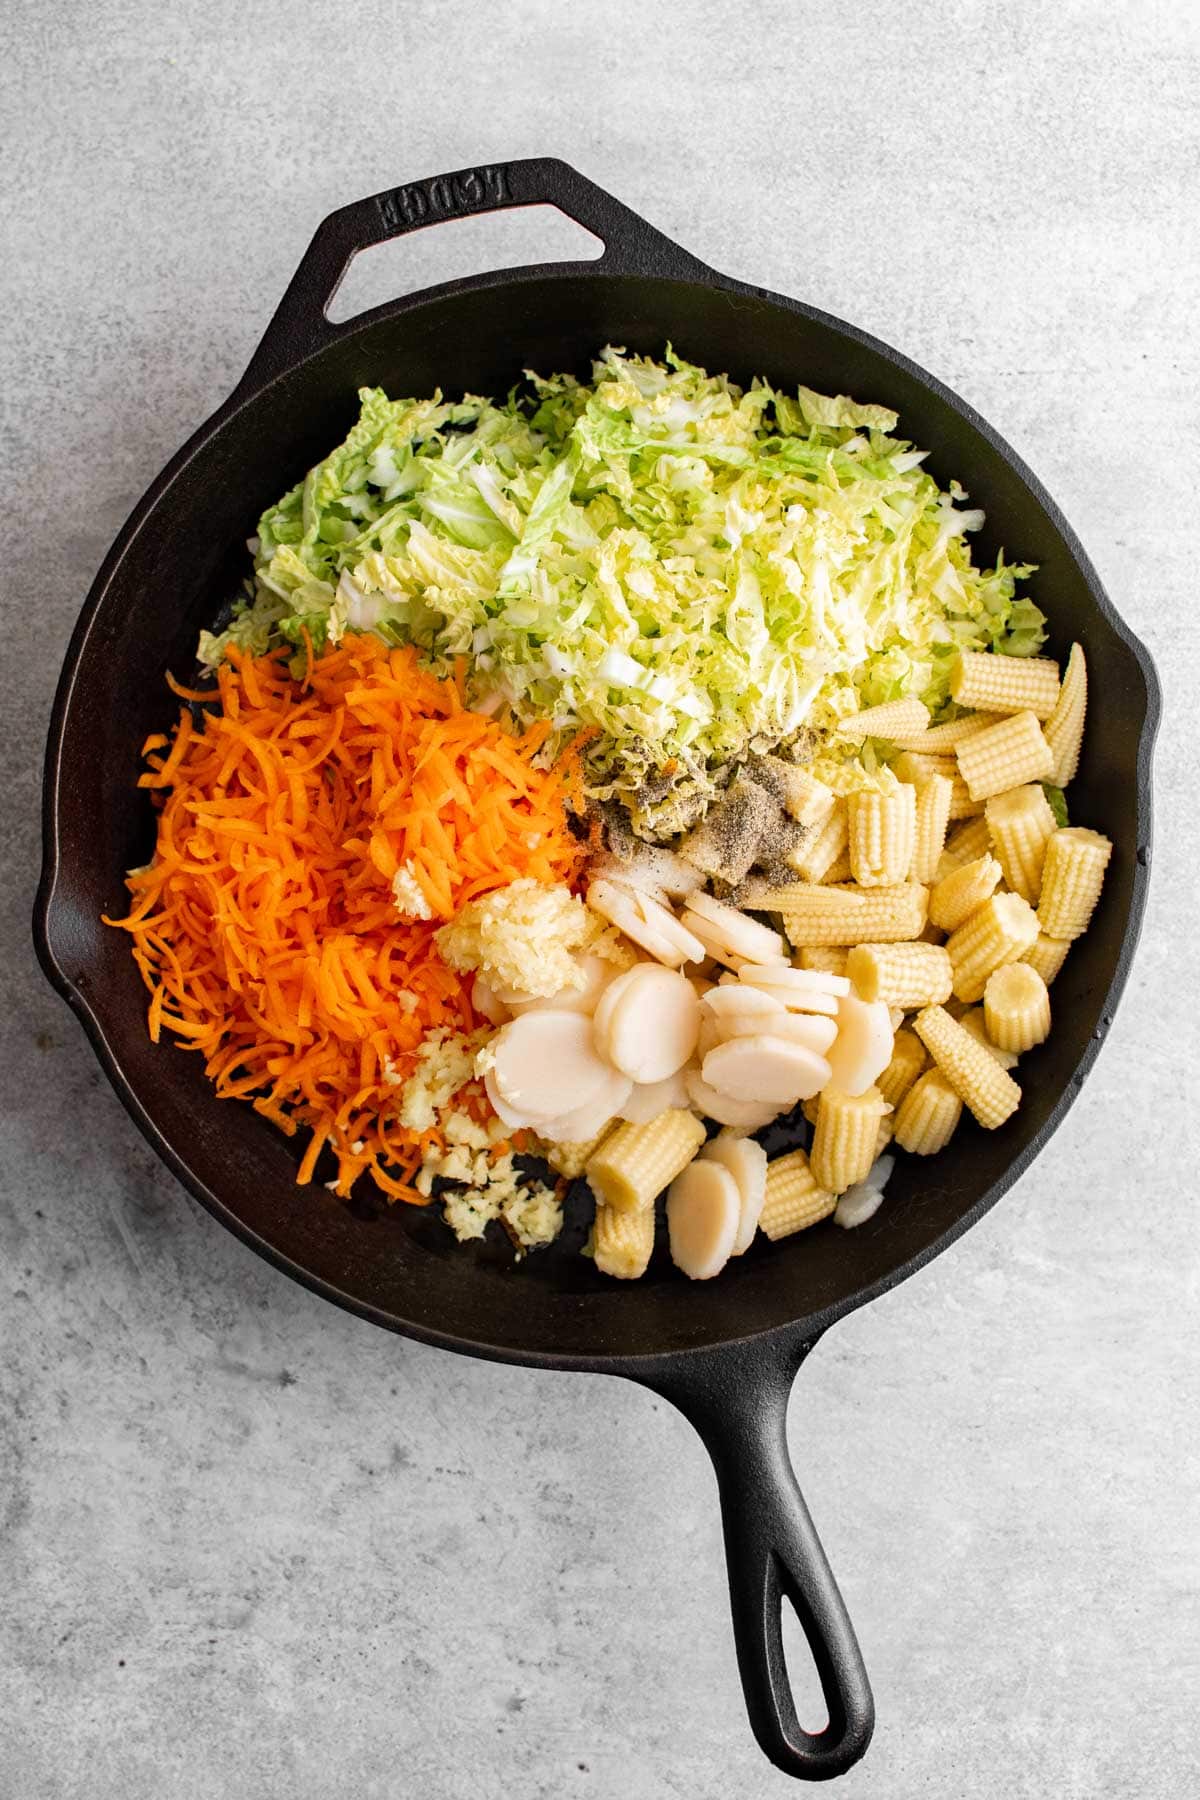 shredded carrots, cabbage, baby corn, water chestnuts in a large skillet